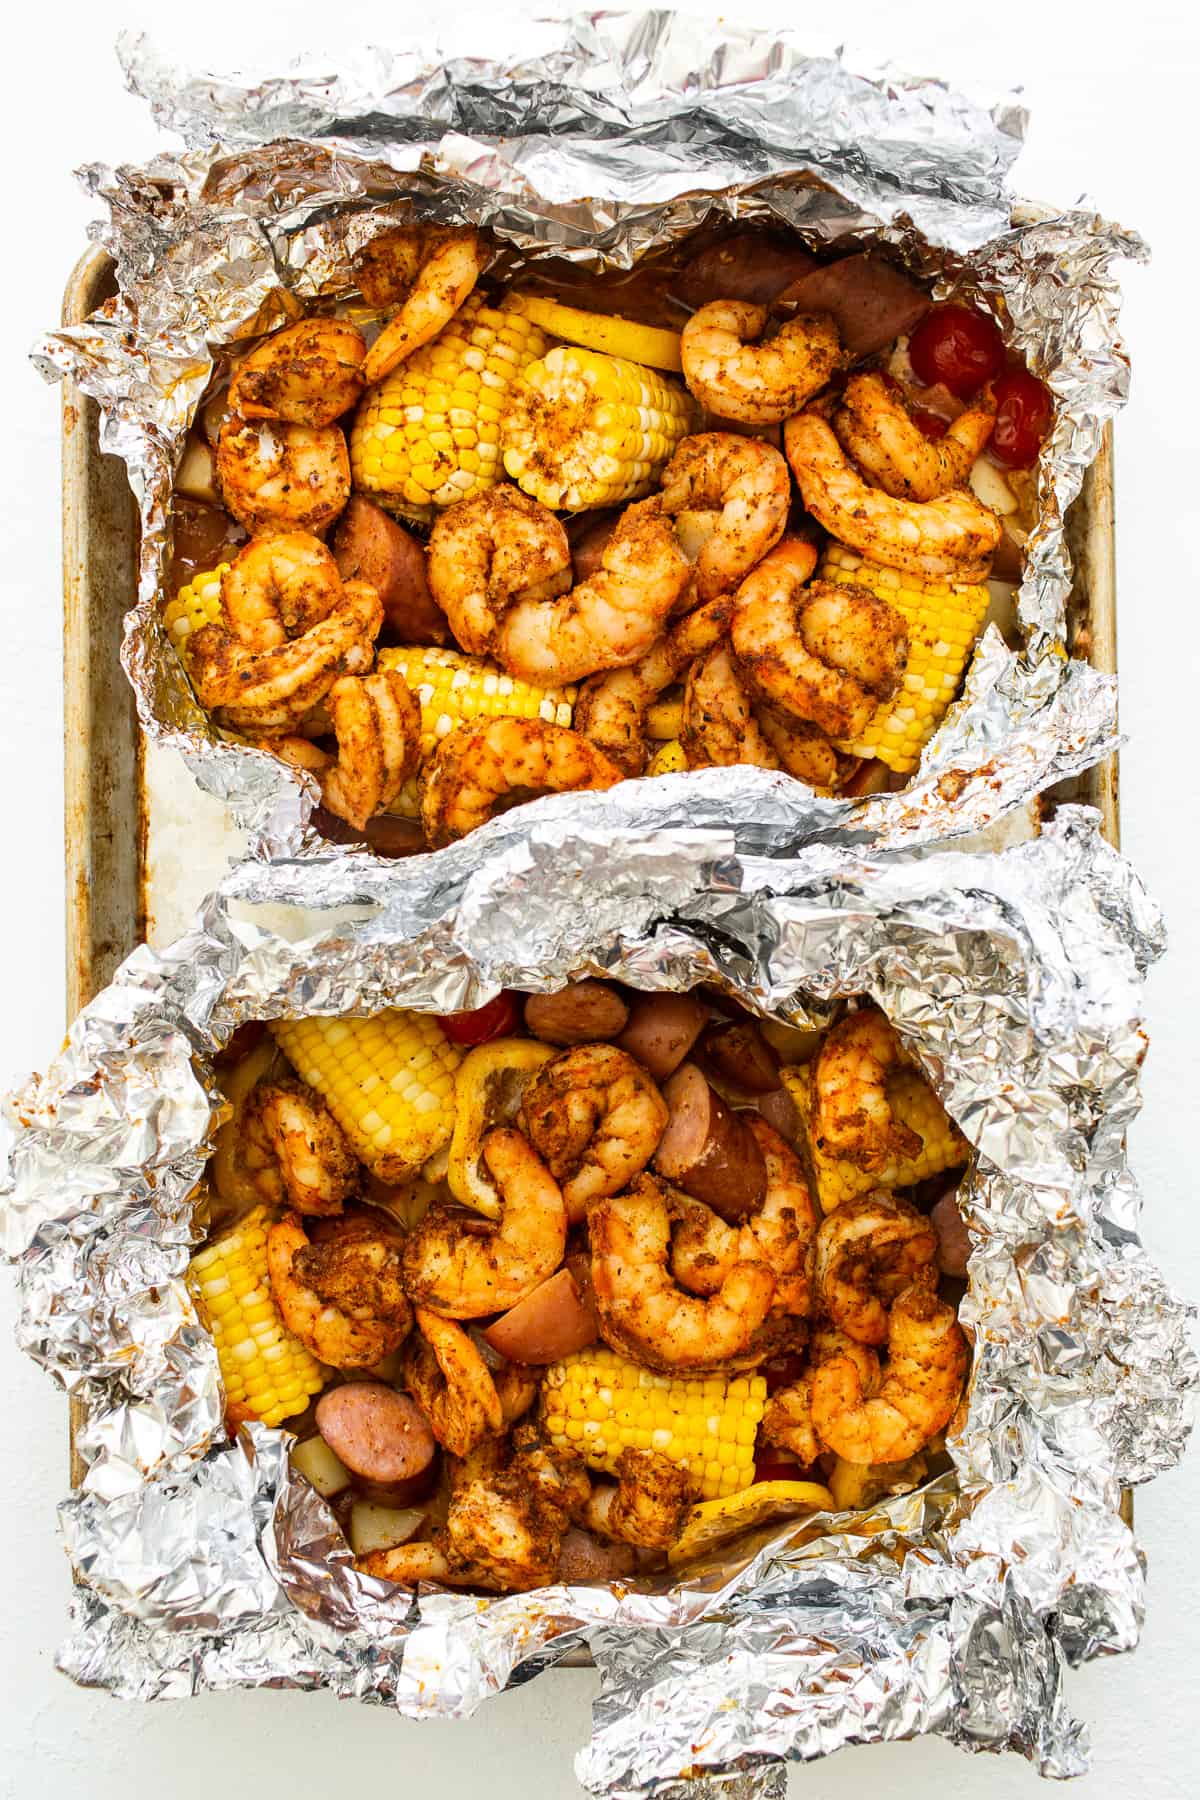 All or the ingredients for these shrimp packets go into two foil packs.